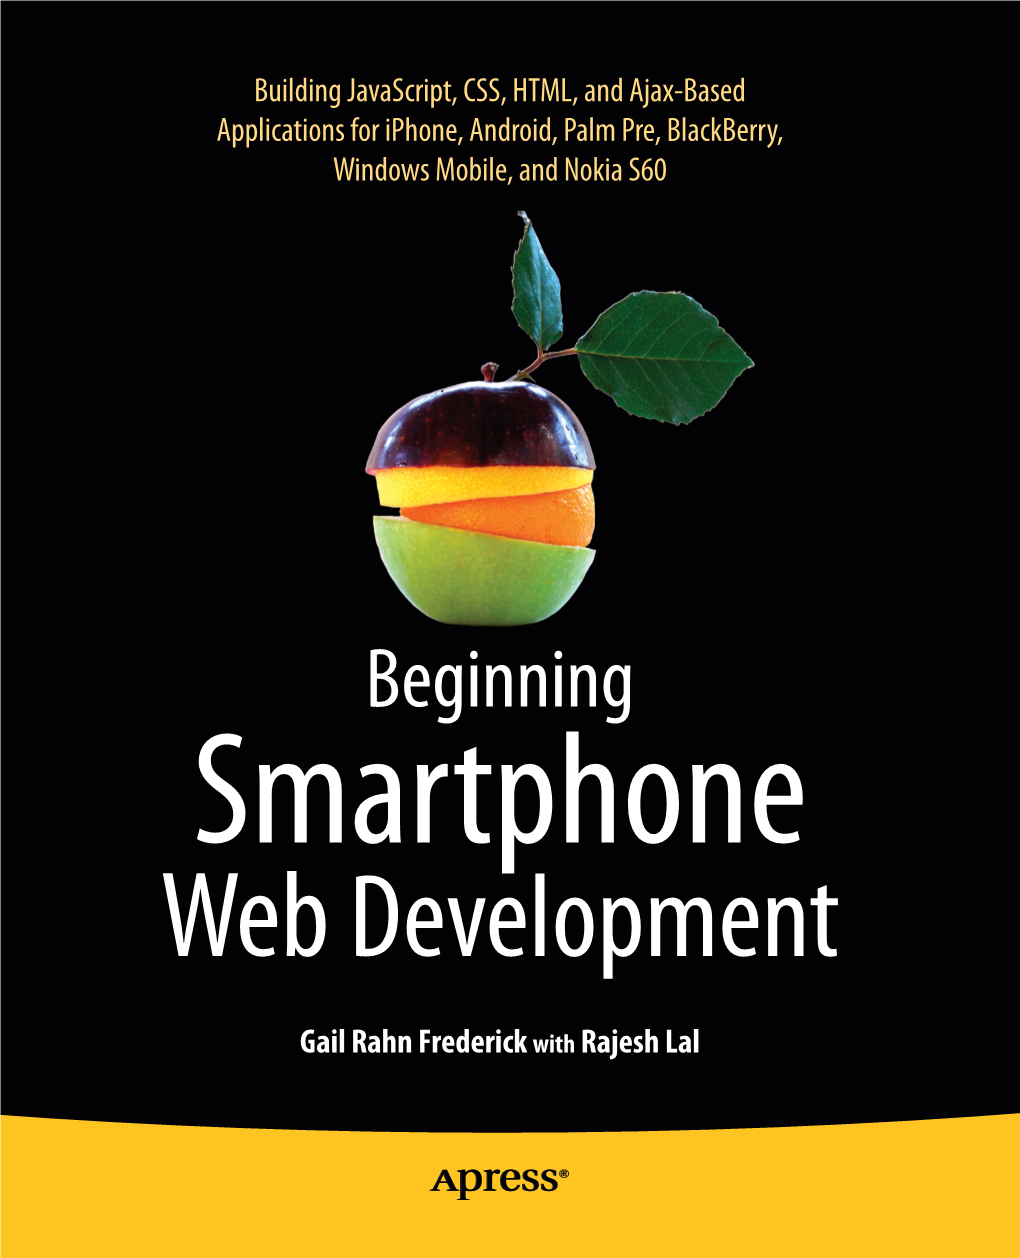 Web Development with Lal 9 9 9 5 3 6208 22 - - - - - 30 ® 4 781 ISBN 978-1-4302-2620-8 IE Mobile